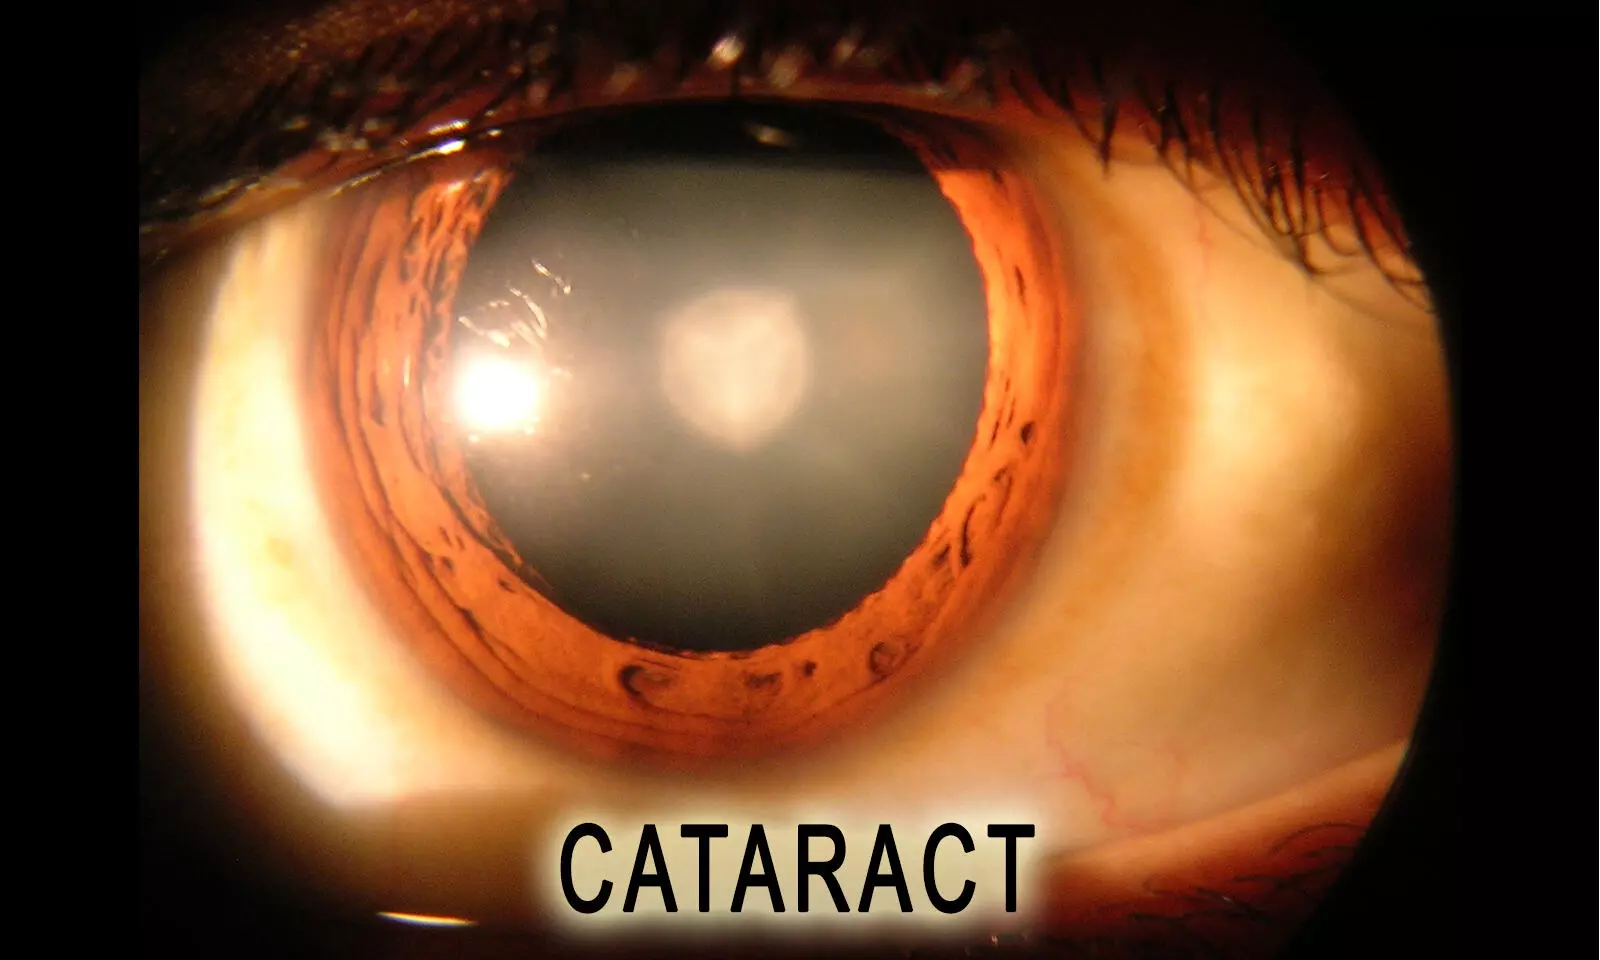 New Artificial Lens May obviate need of glasses after cataract surgery